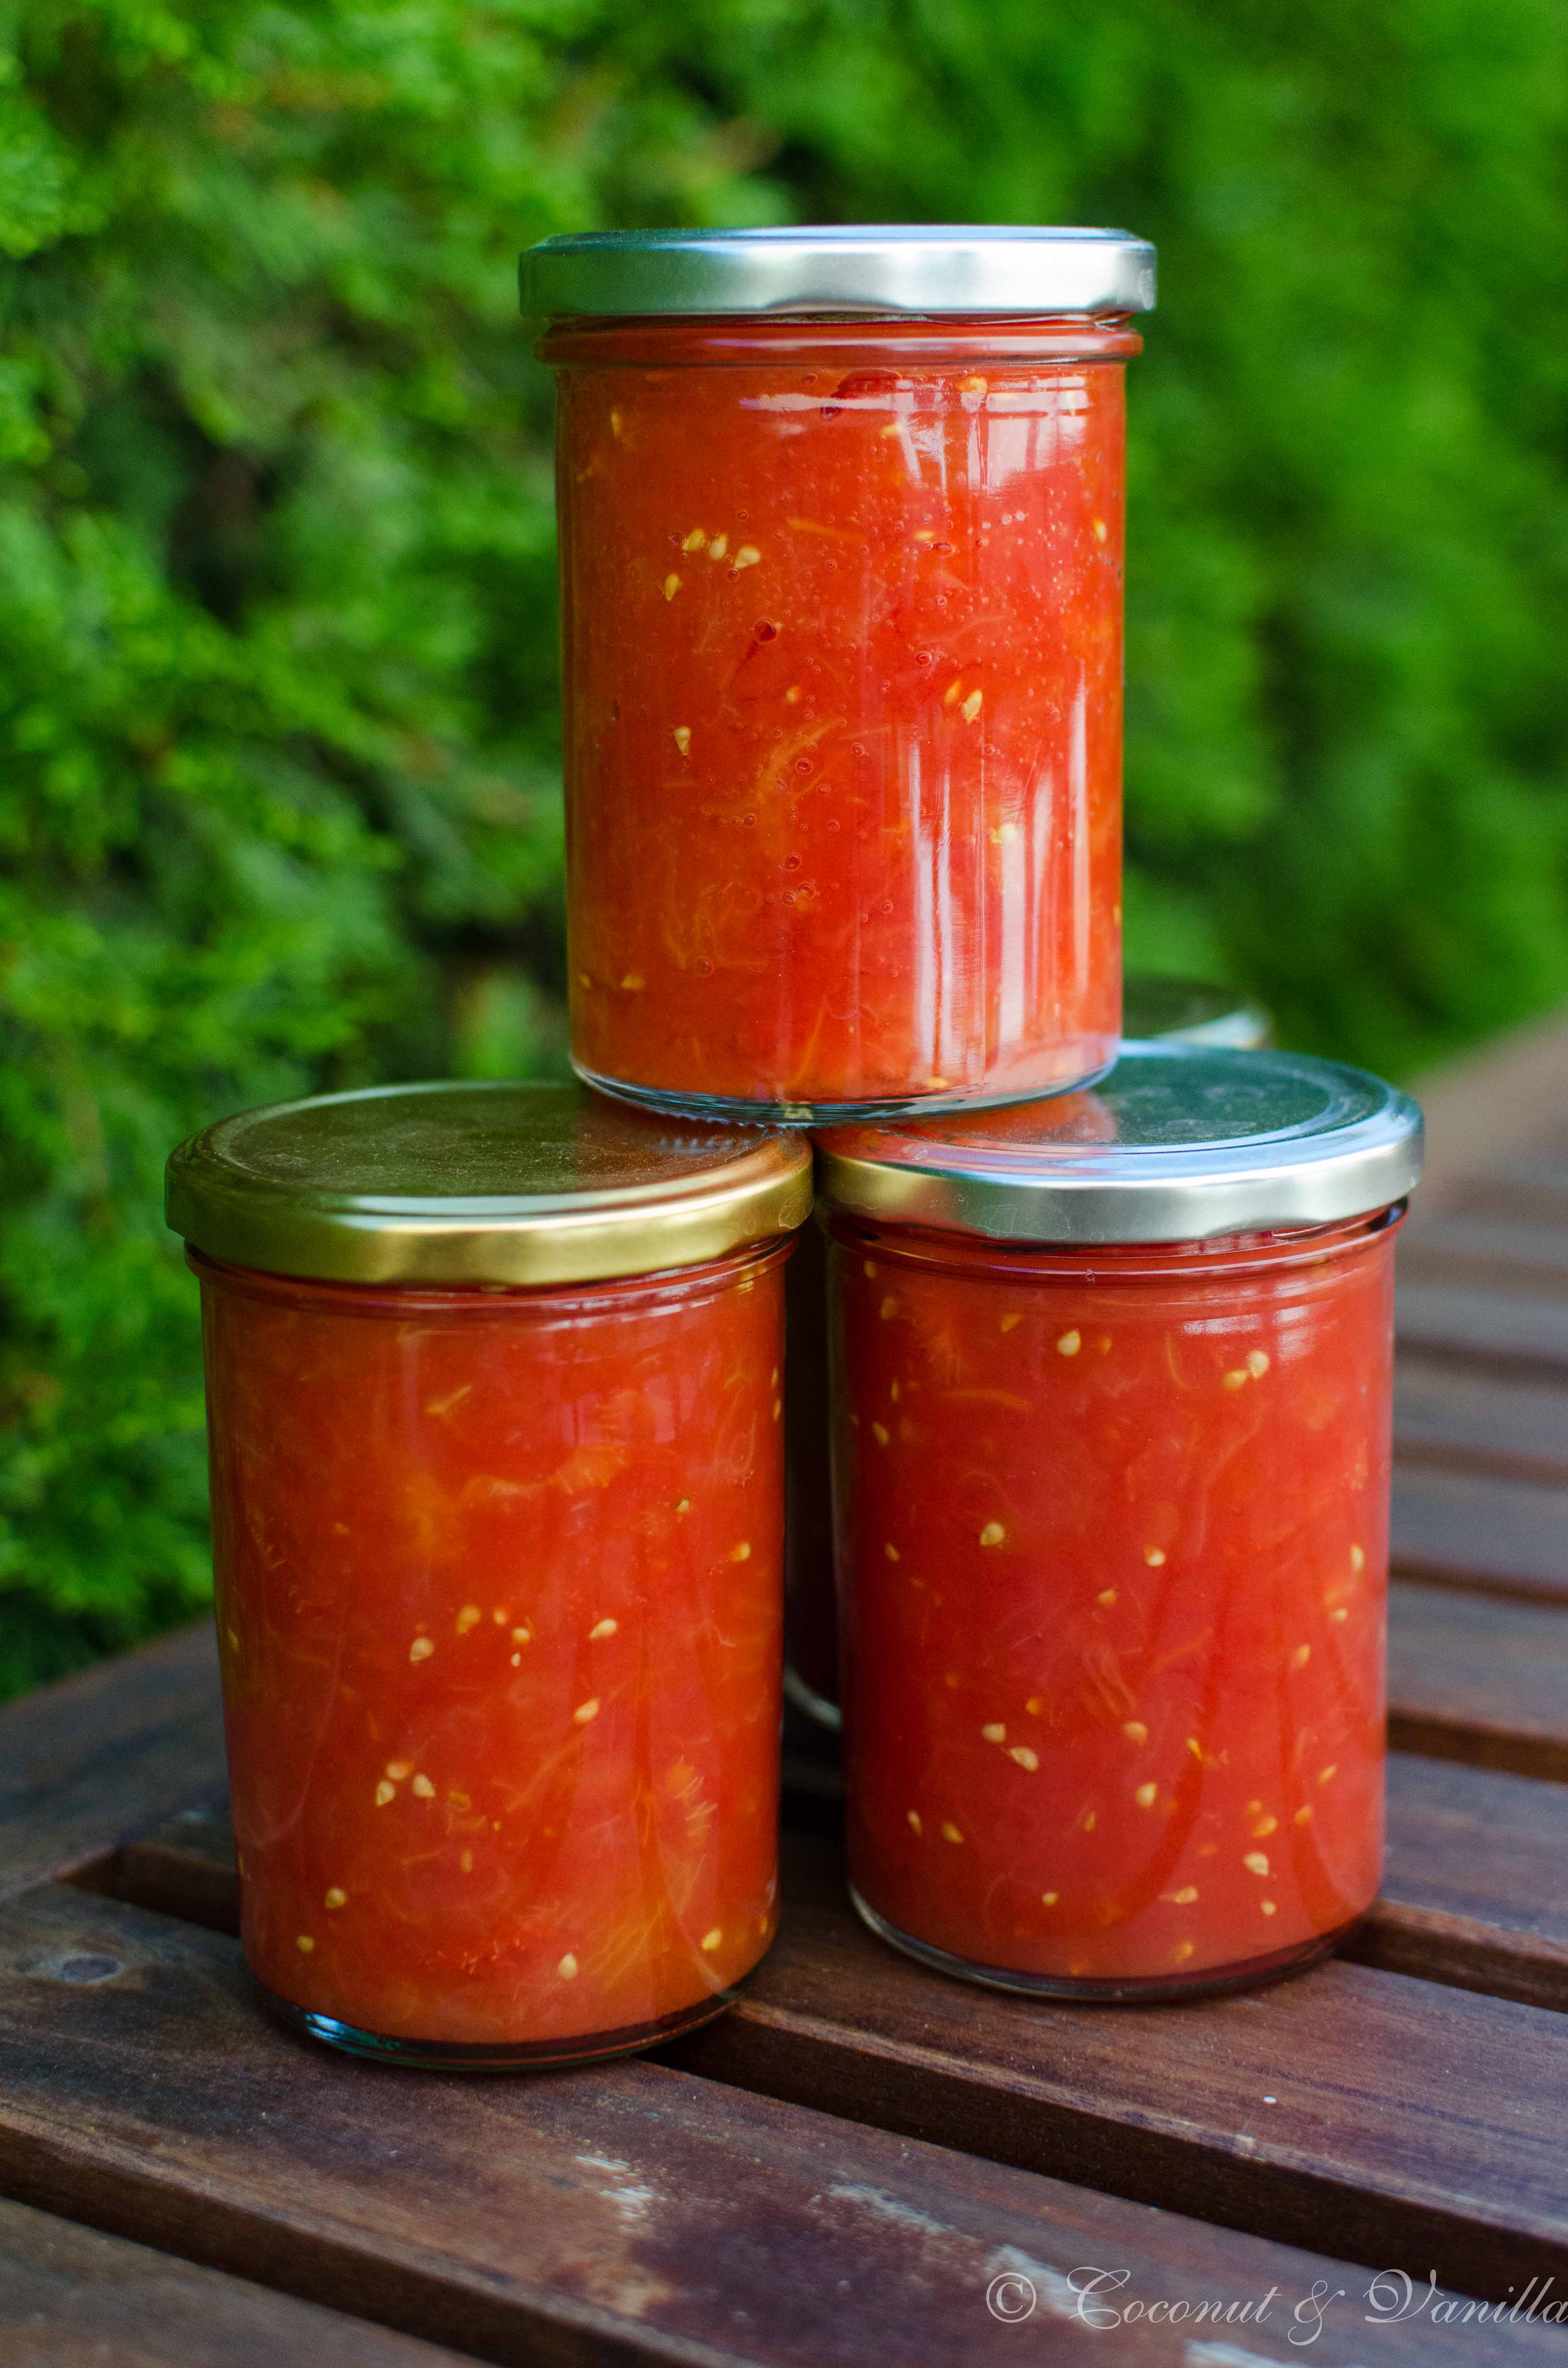 Stückige Tomaten eingemacht - preserved crushed tomatoes by Coconut & Vanilla